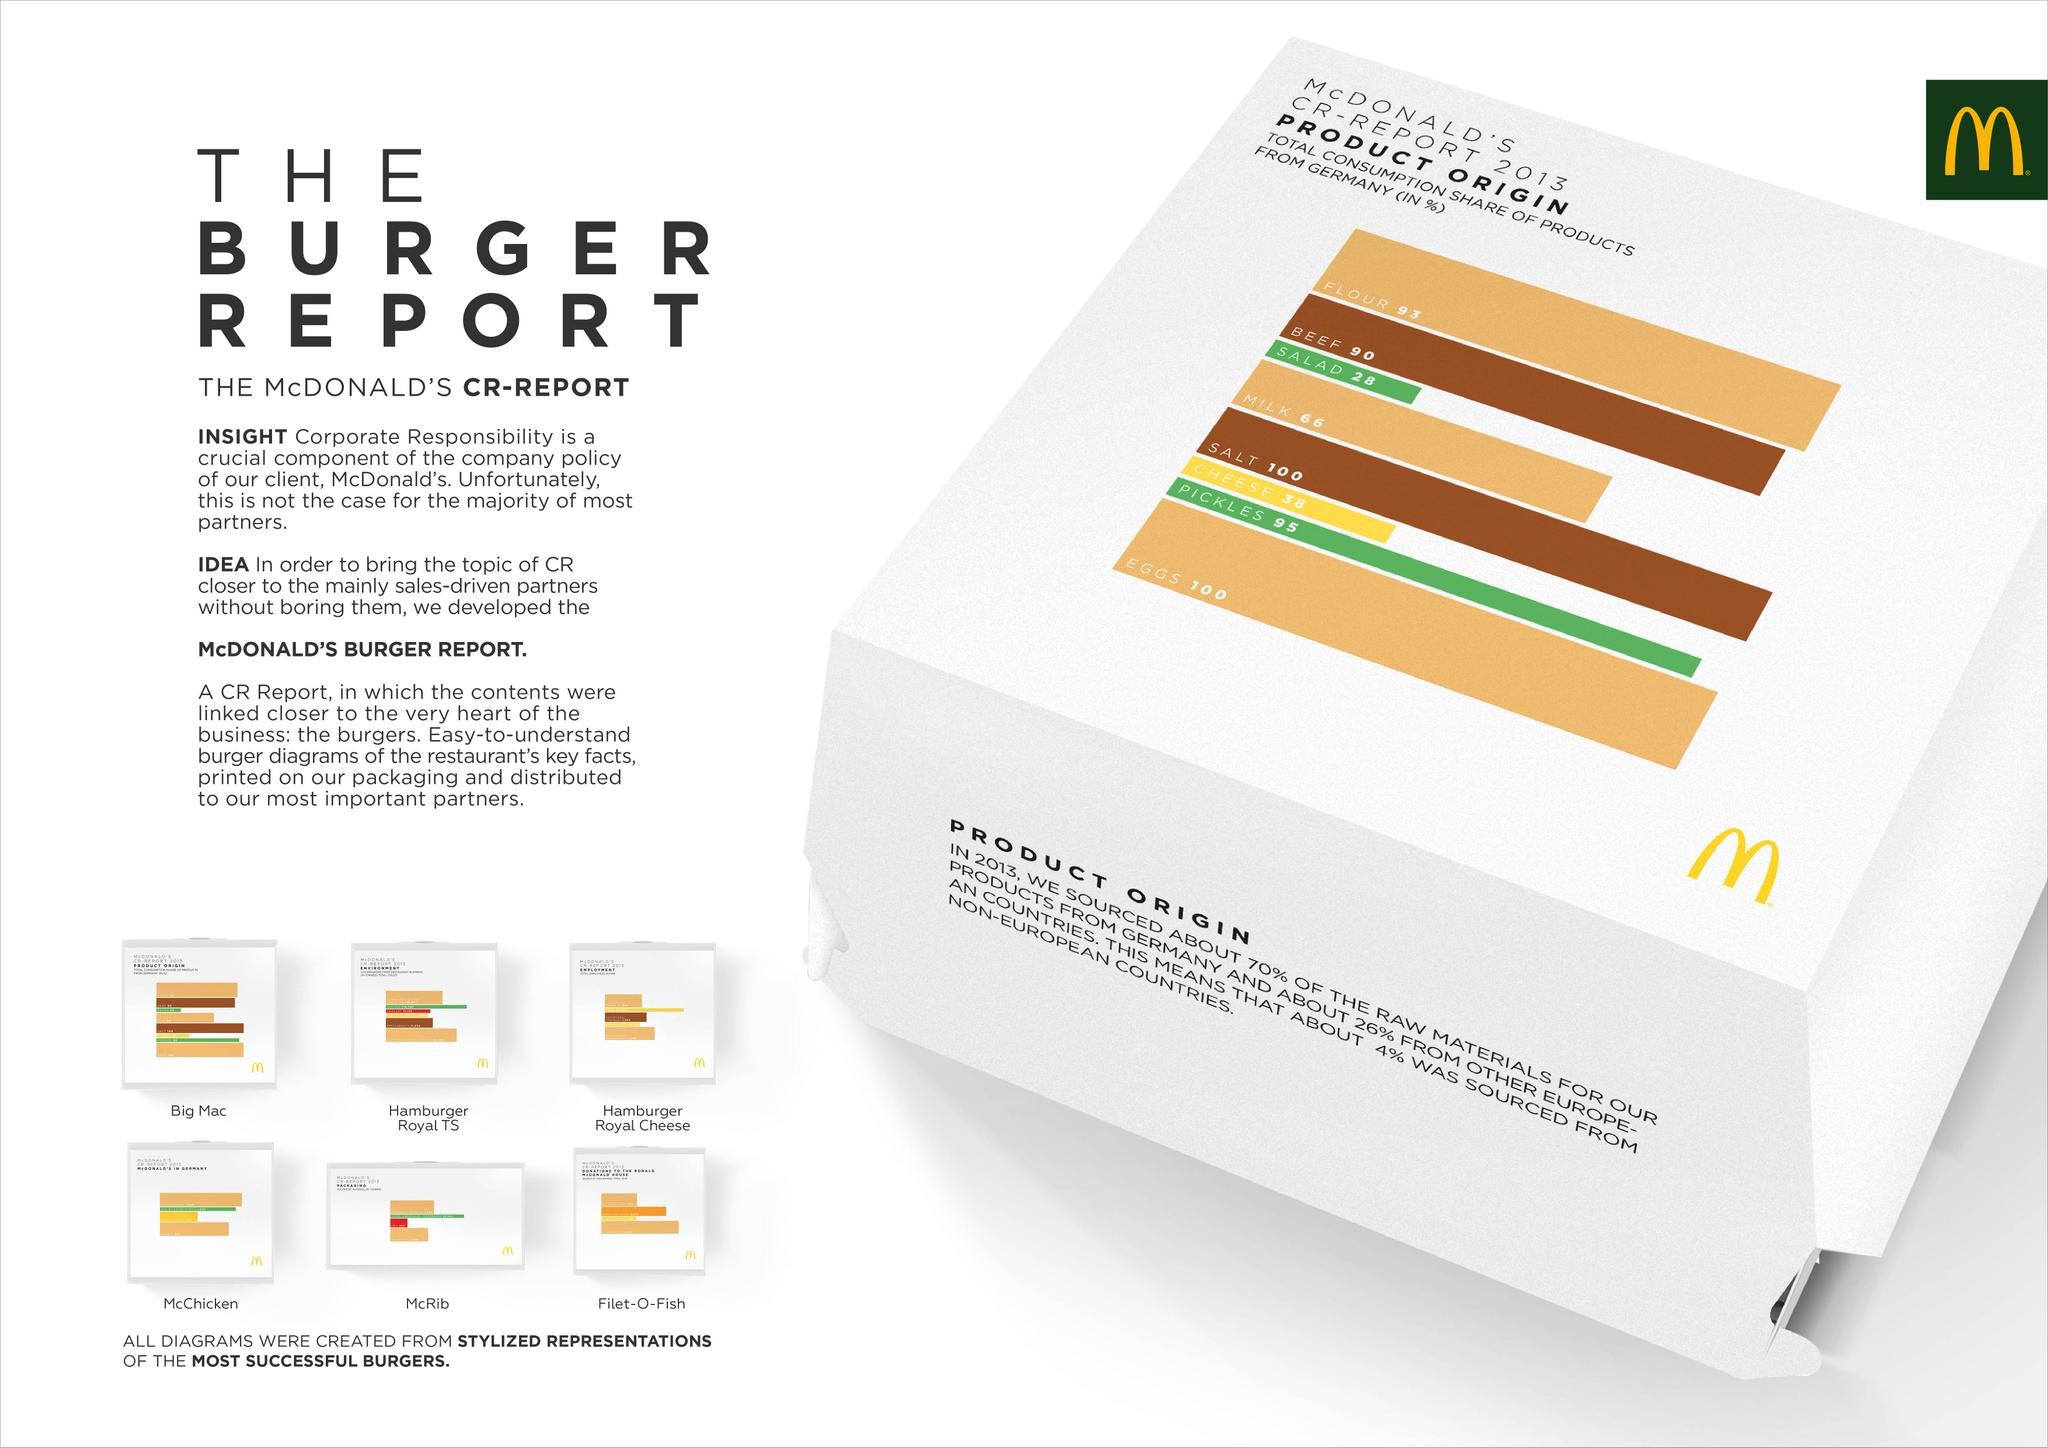 THE BURGER REPORT